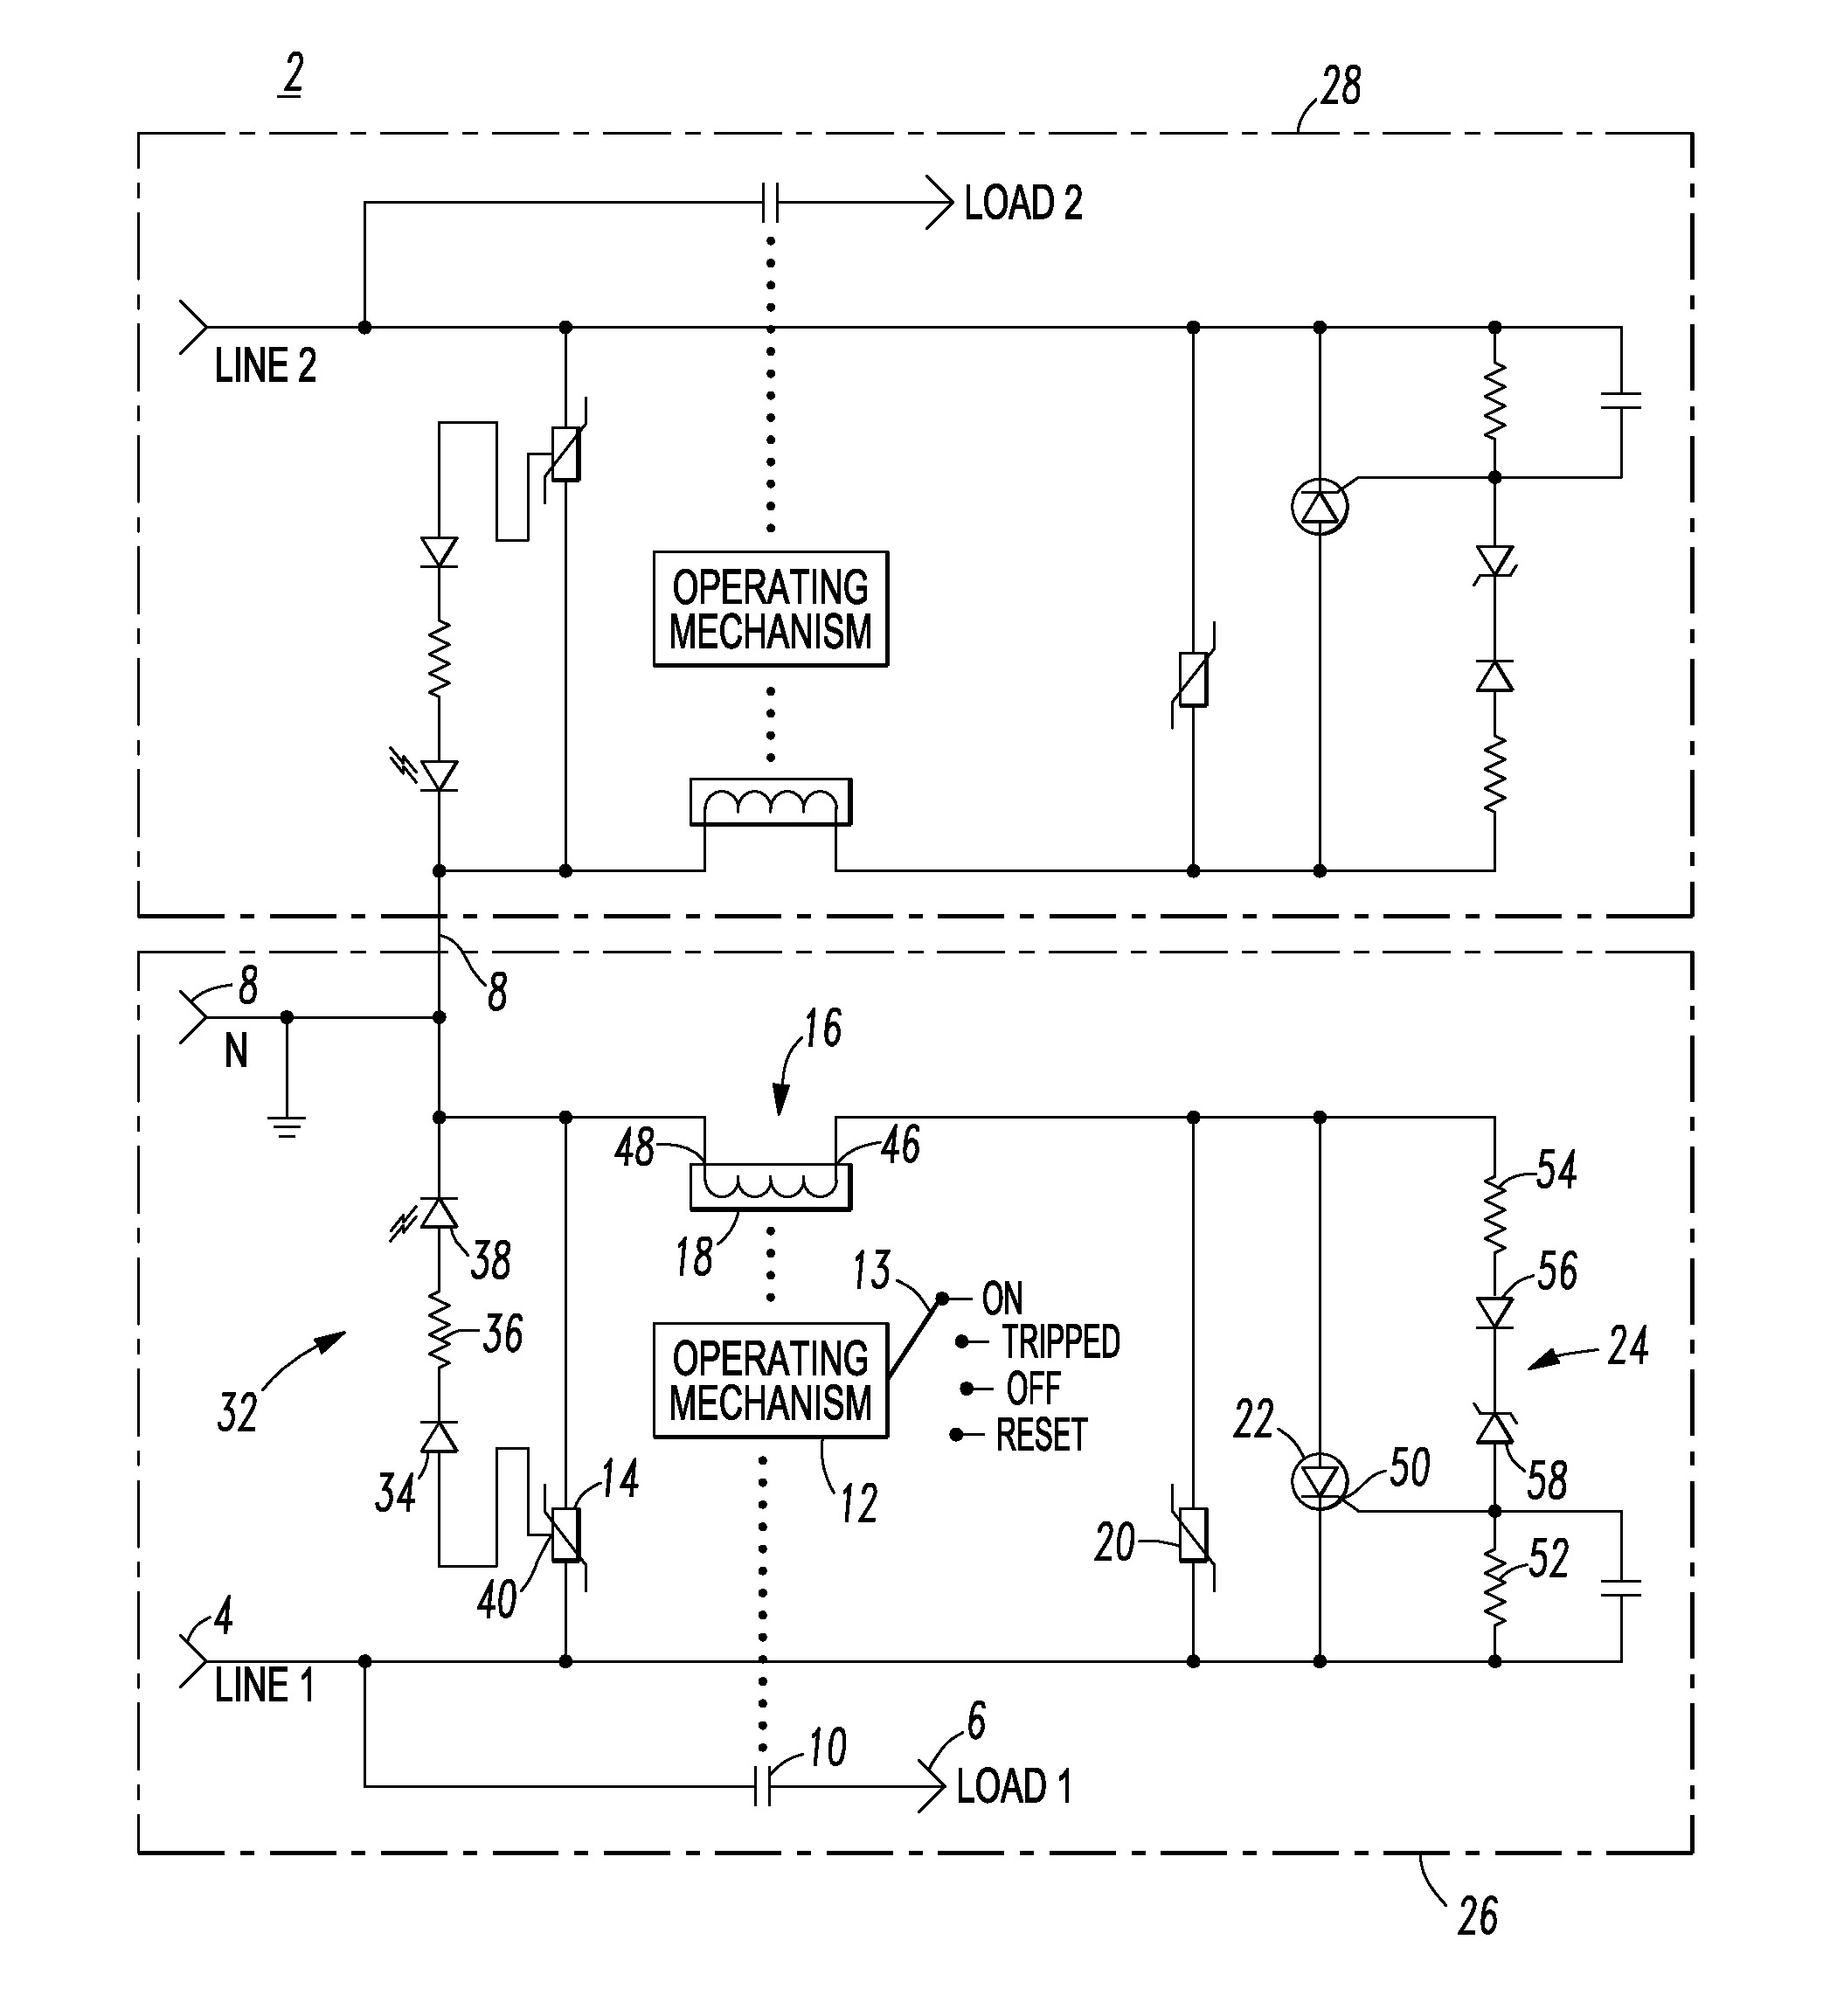 Electrical switching apparatus with overvoltage protection